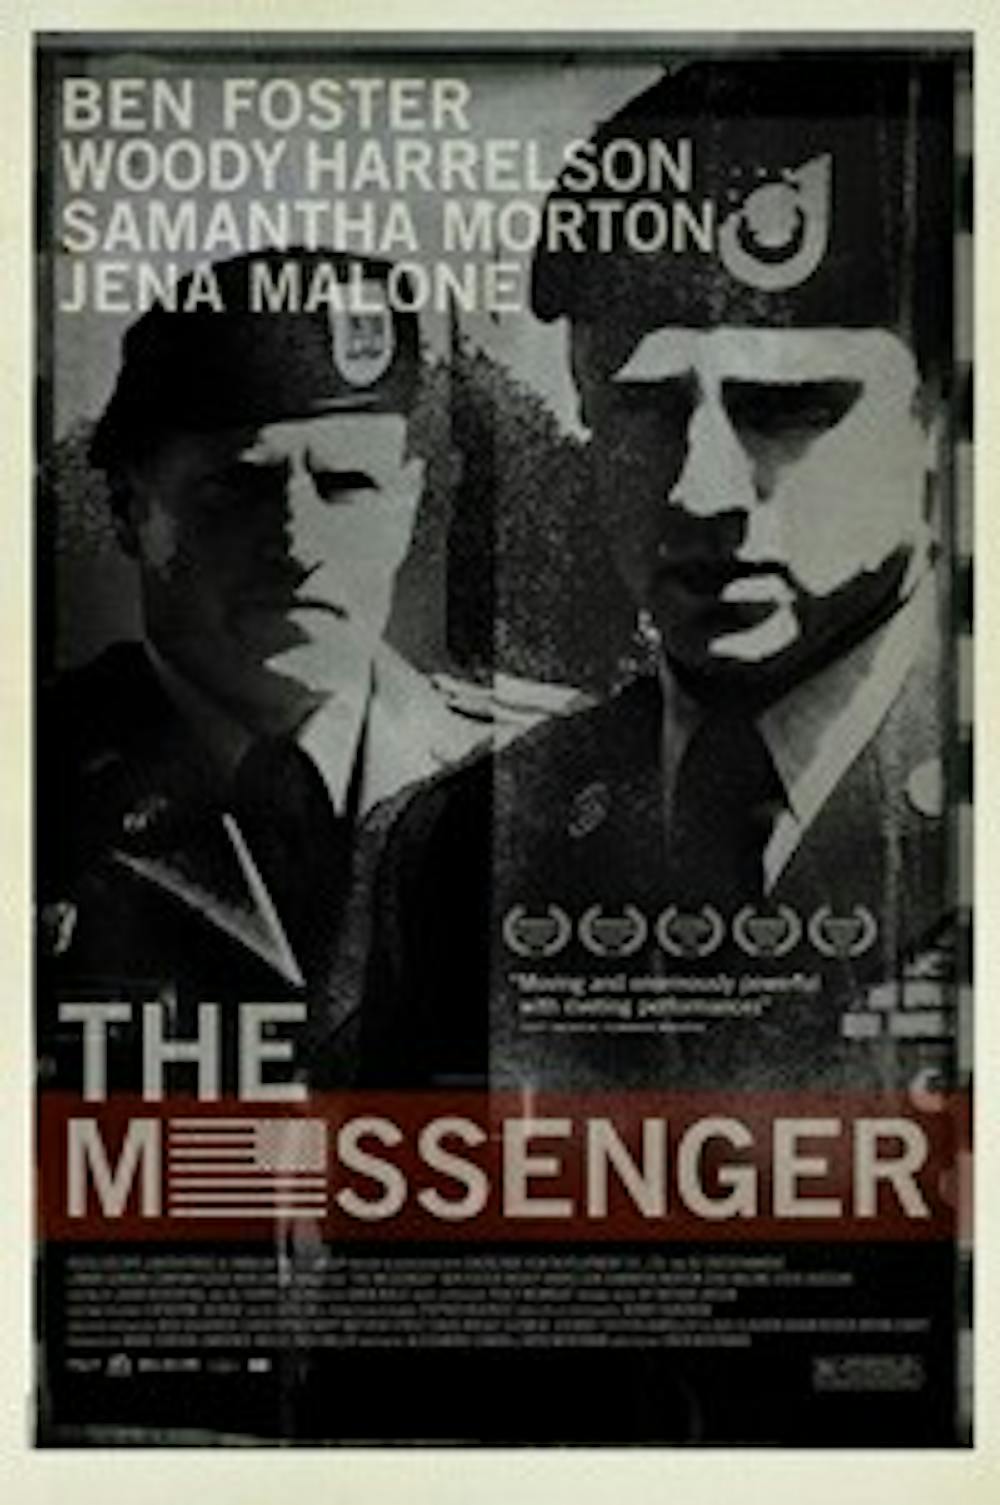 “The Messenger” is now playing at The Chelsea Theater.  Courtesy of Oscilloscope Laboratories